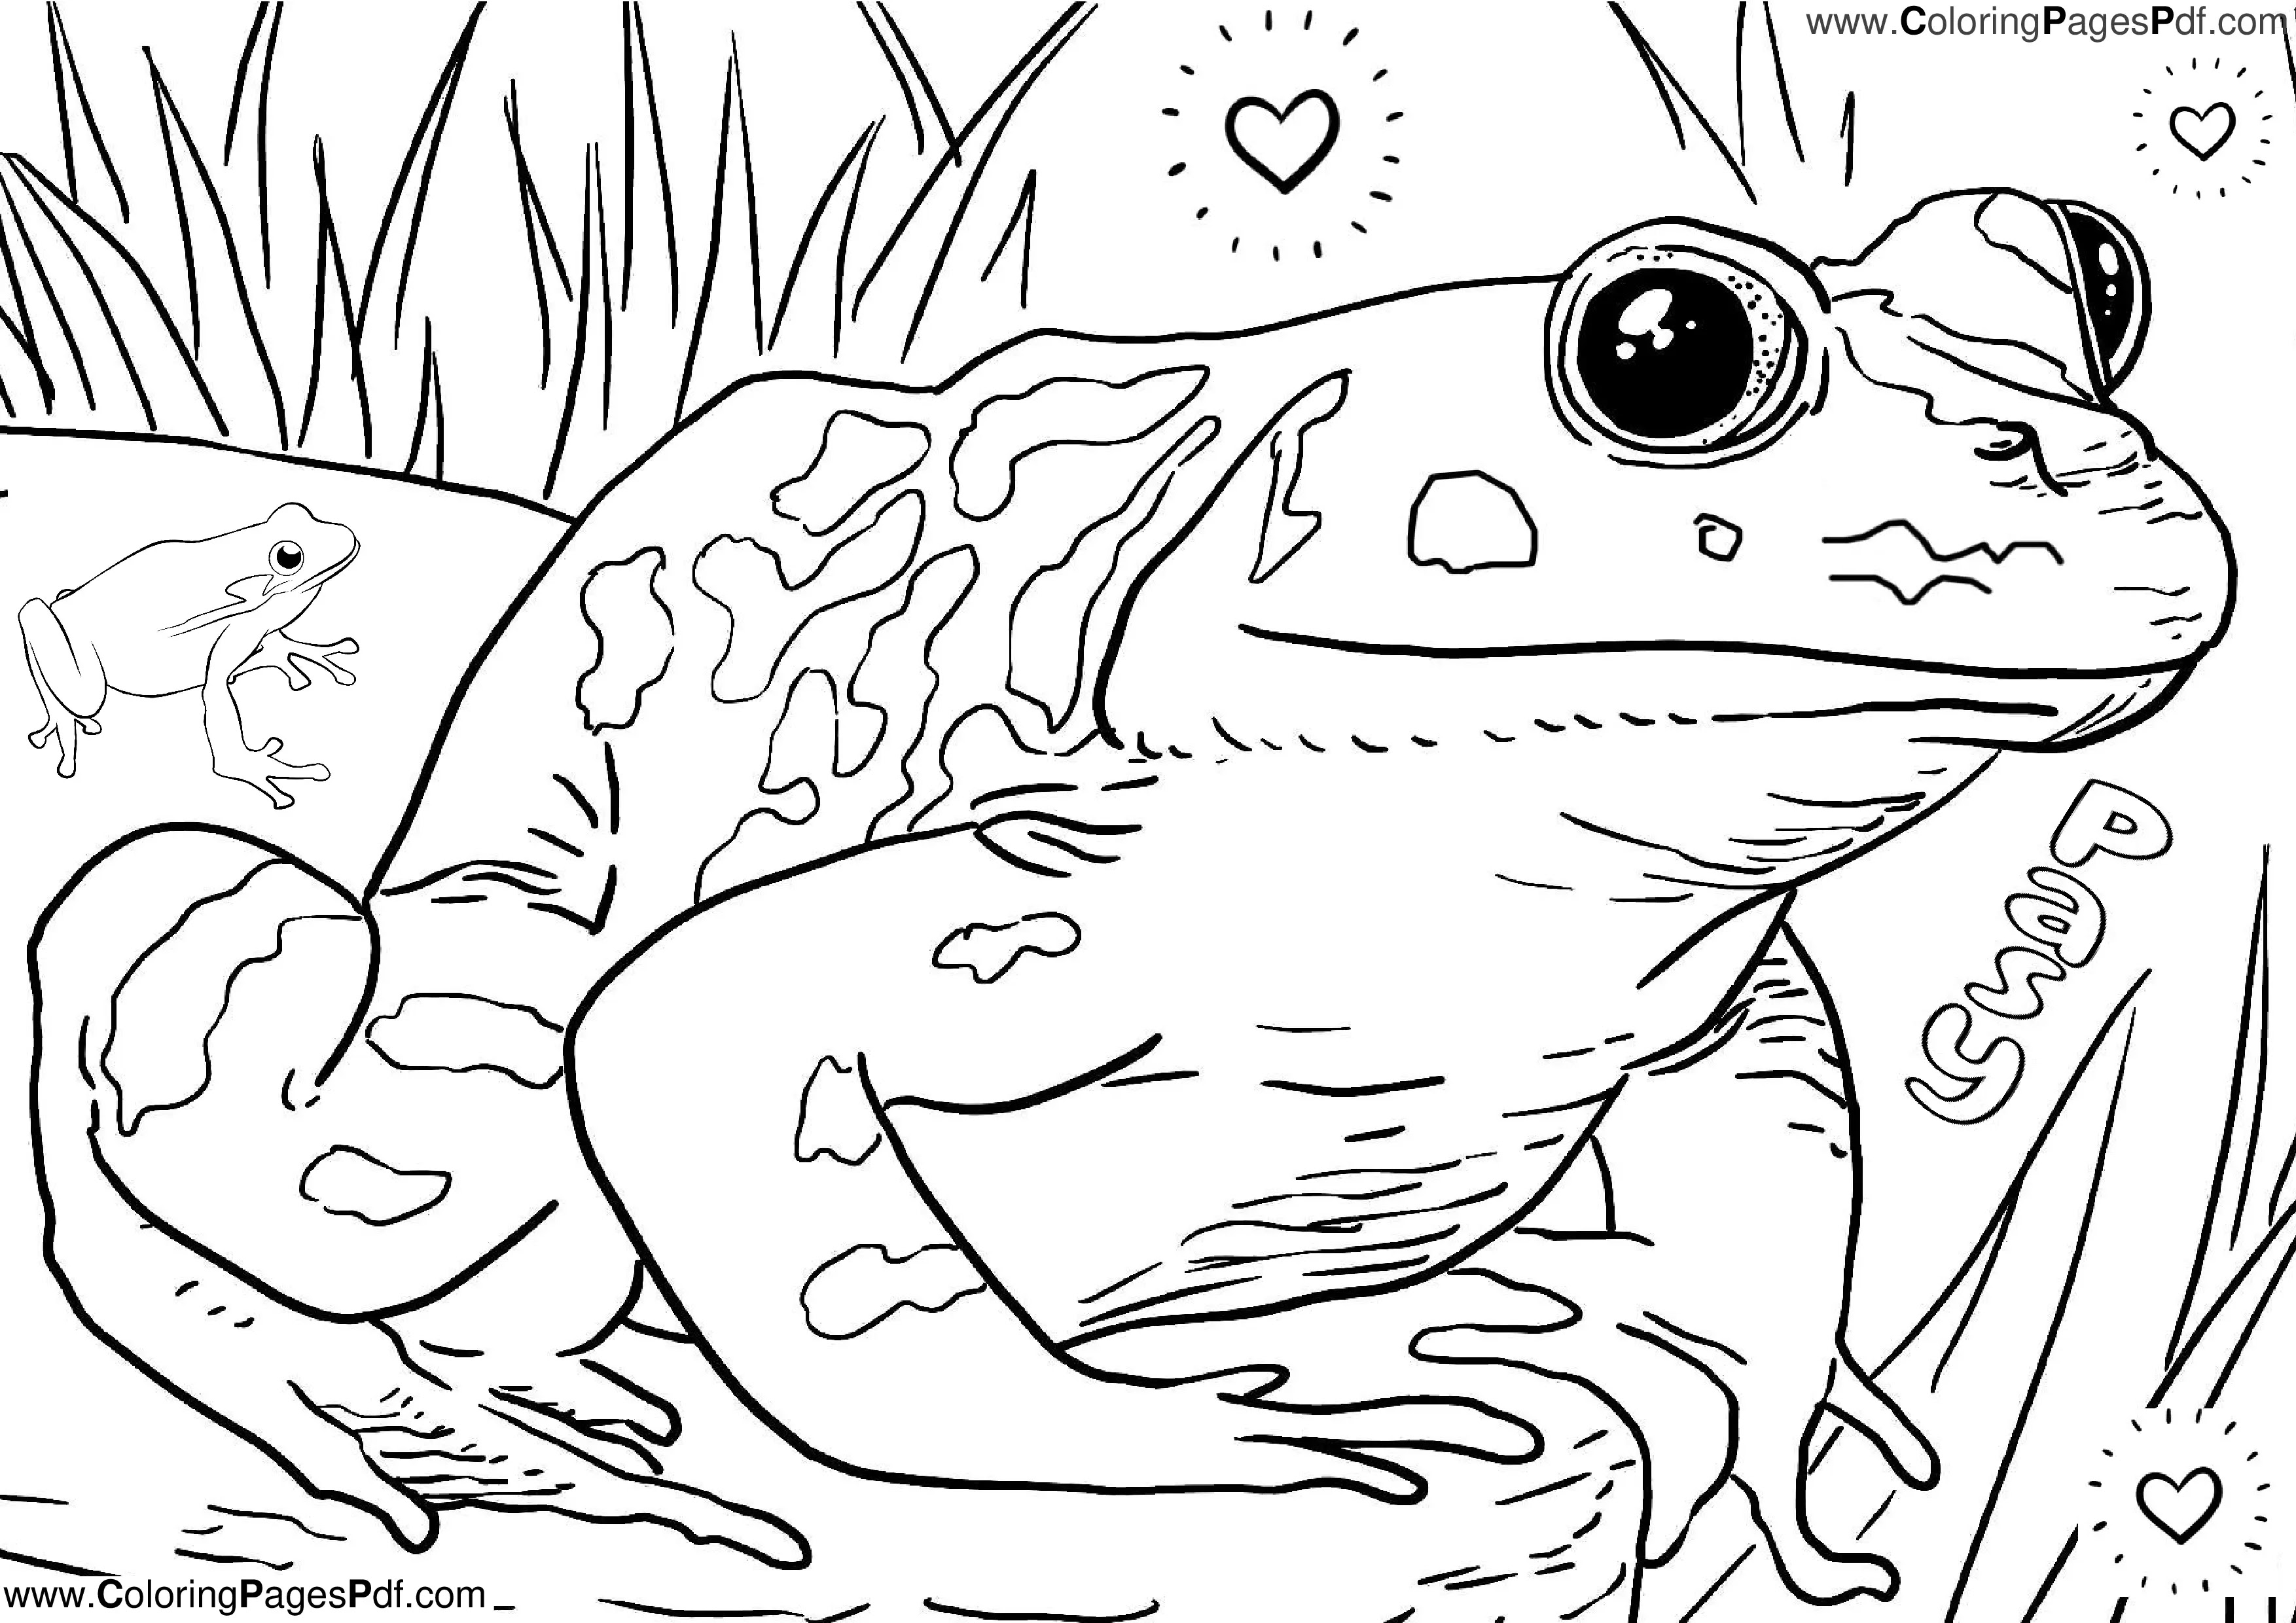 Frog coloring pages' aesthetic